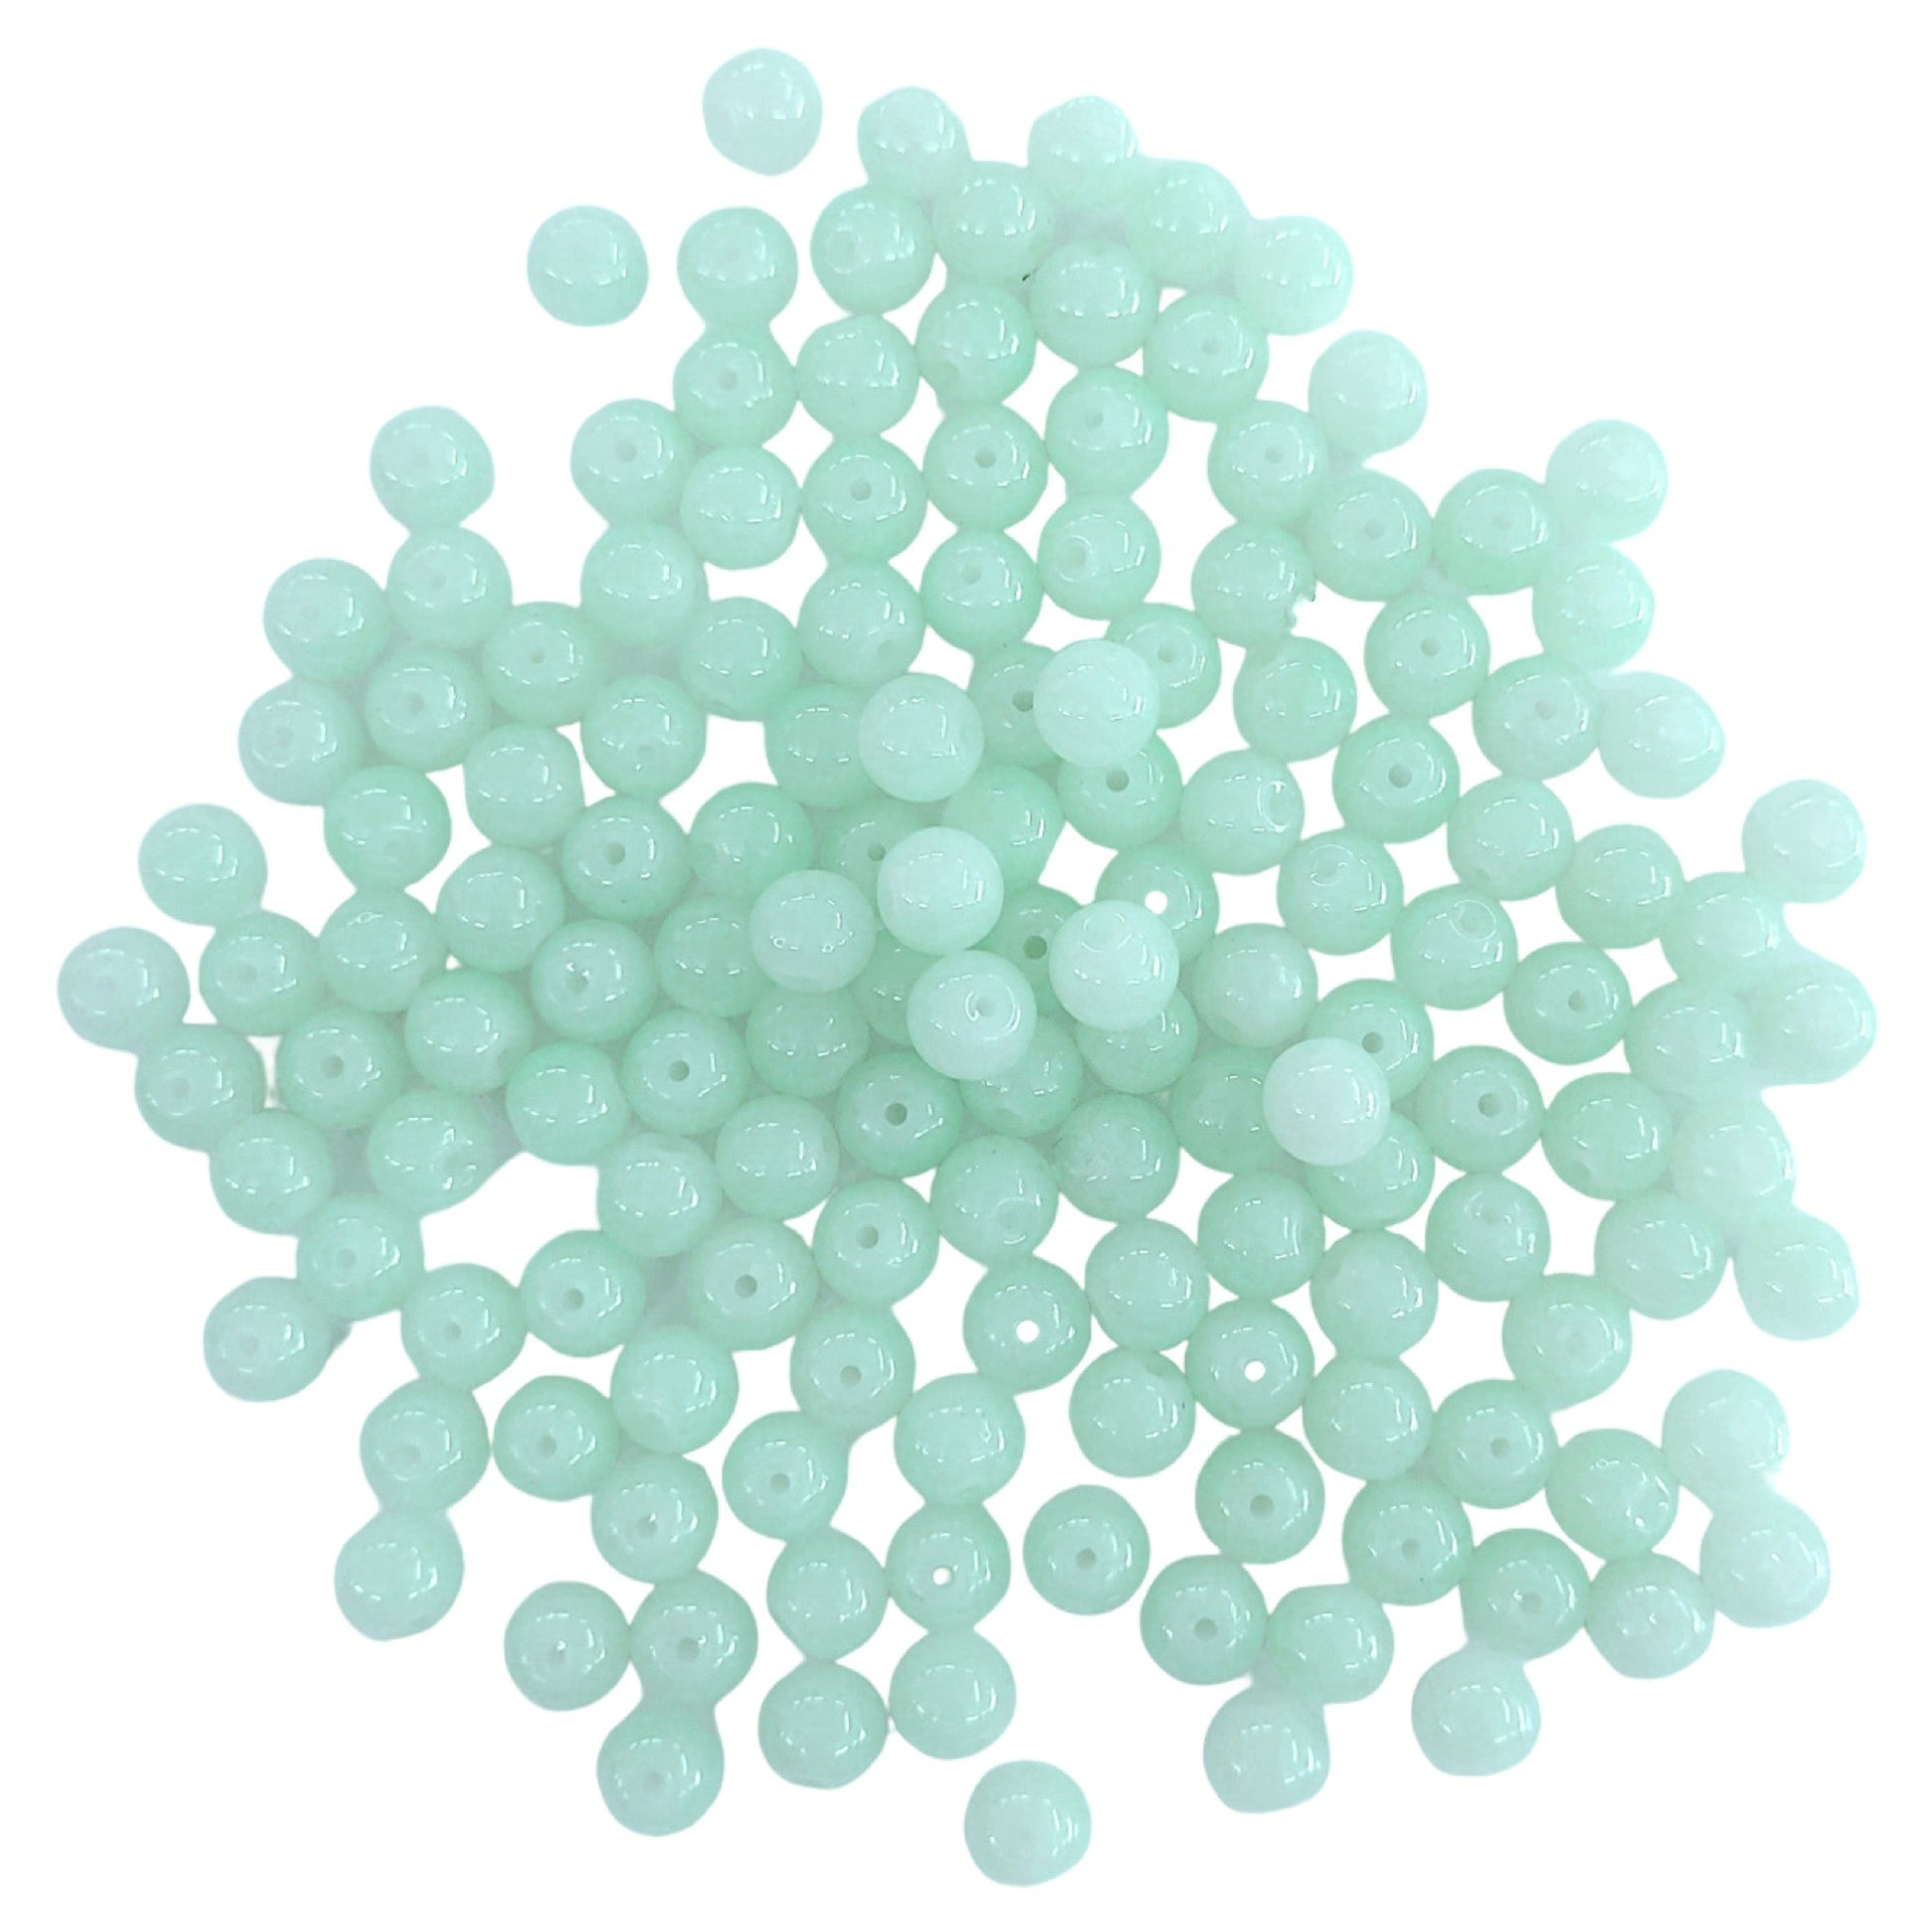 Indian Petals - Premium quality Round shape Glass Beads for DIY Craft, Trousseau Packing or Decoration - Design 725 Premium quality Round shape Glass Beads for DIY Craft, Trousseau Packing or Decoration - Design 725 - Aquamarine / 8mm / 50 Pieces